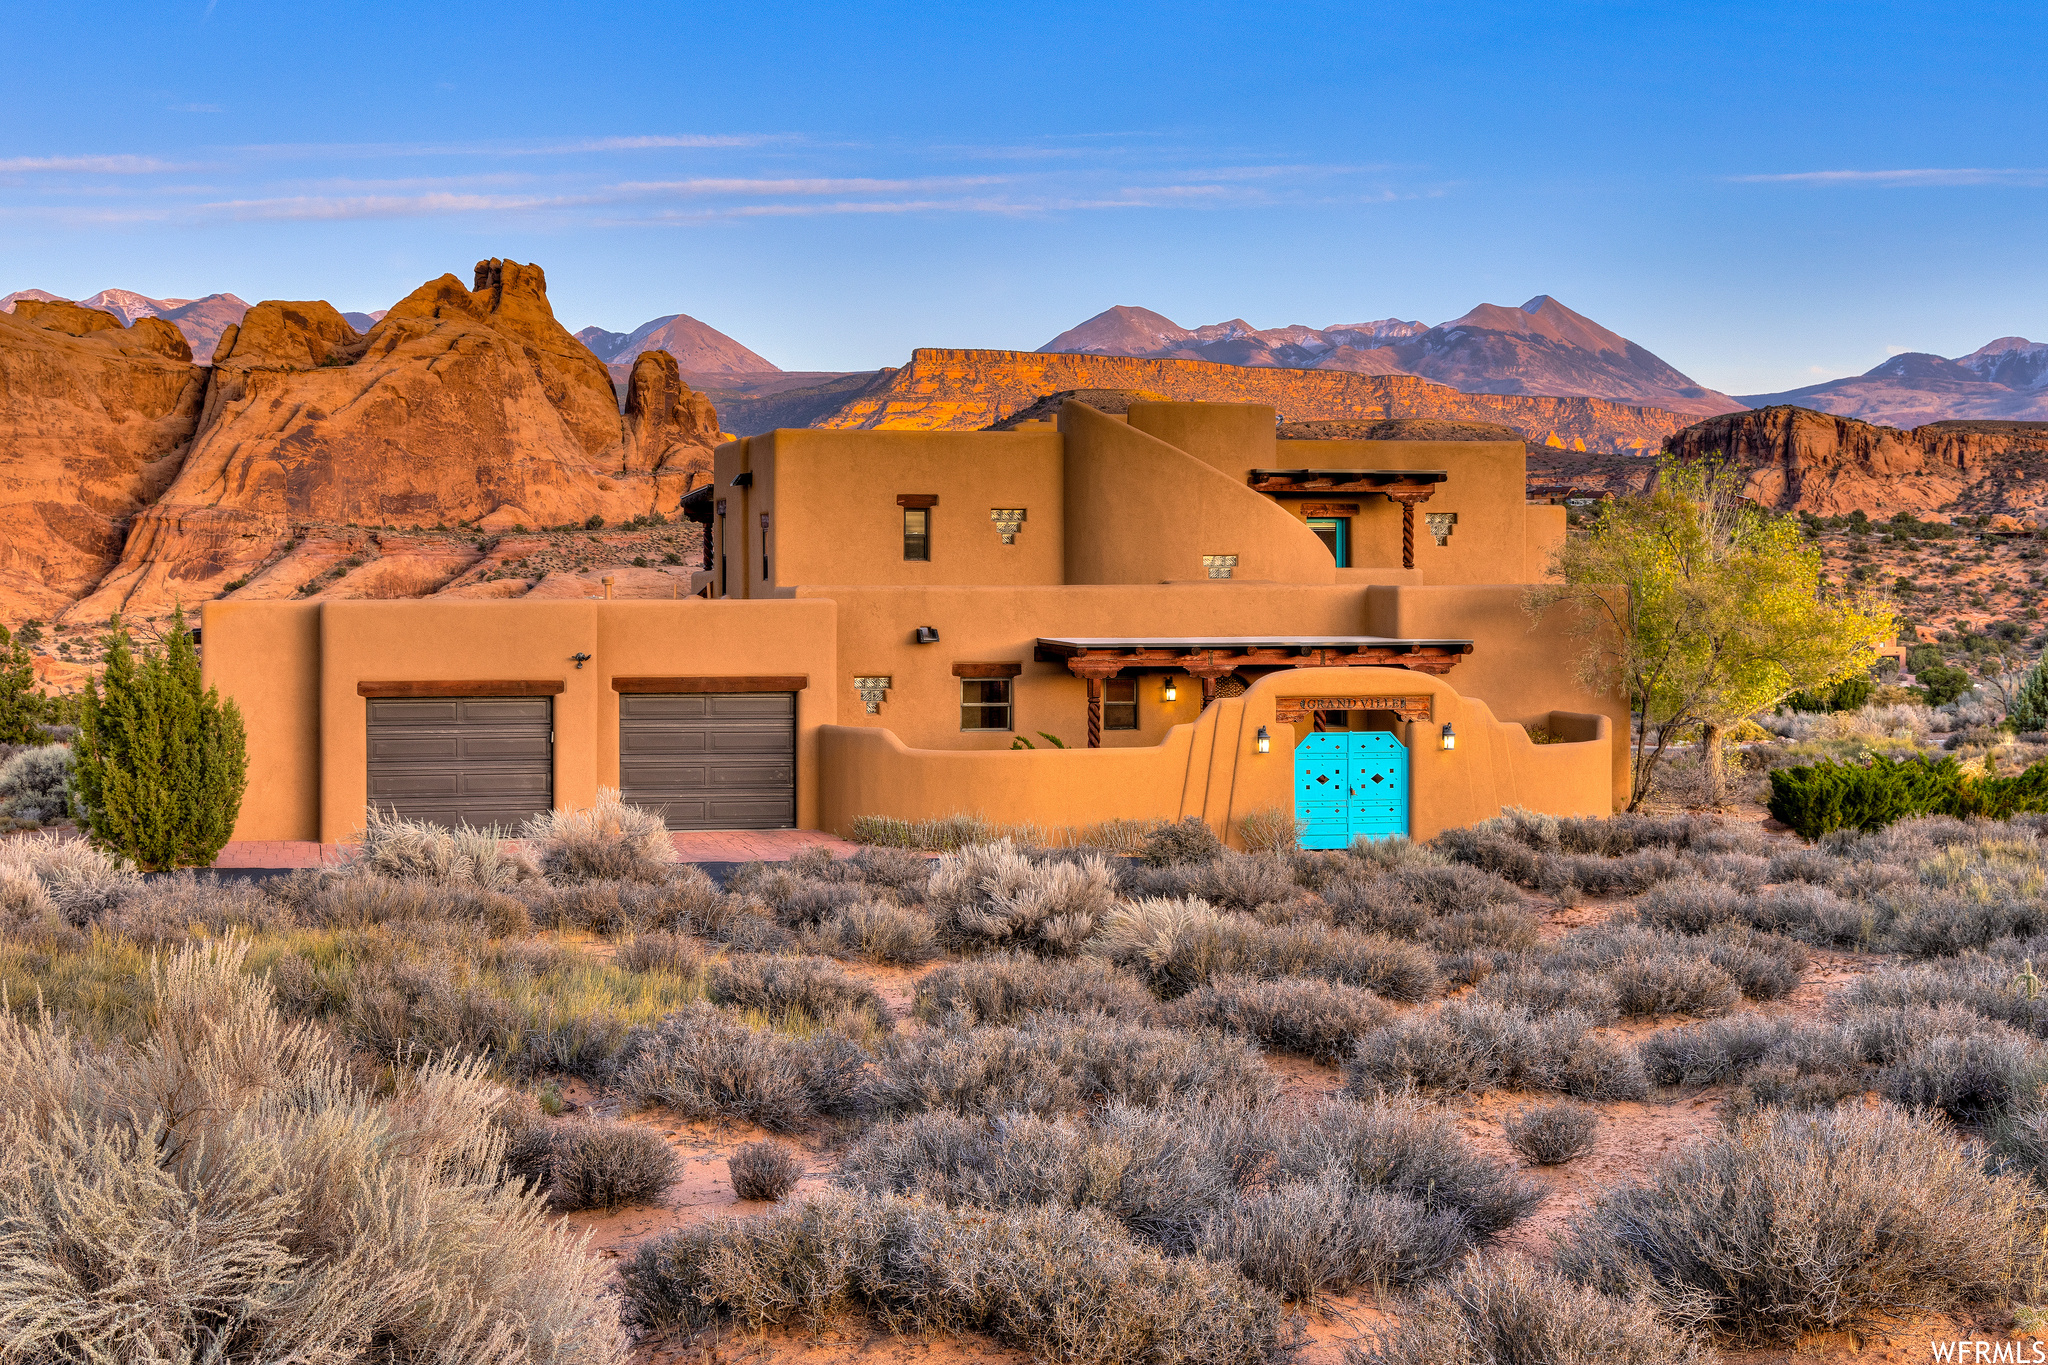 3289 FAR COUNTRY, Moab, Utah 84532, 3 Bedrooms Bedrooms, 13 Rooms Rooms,2 BathroomsBathrooms,Residential,For sale,FAR COUNTRY,1967523